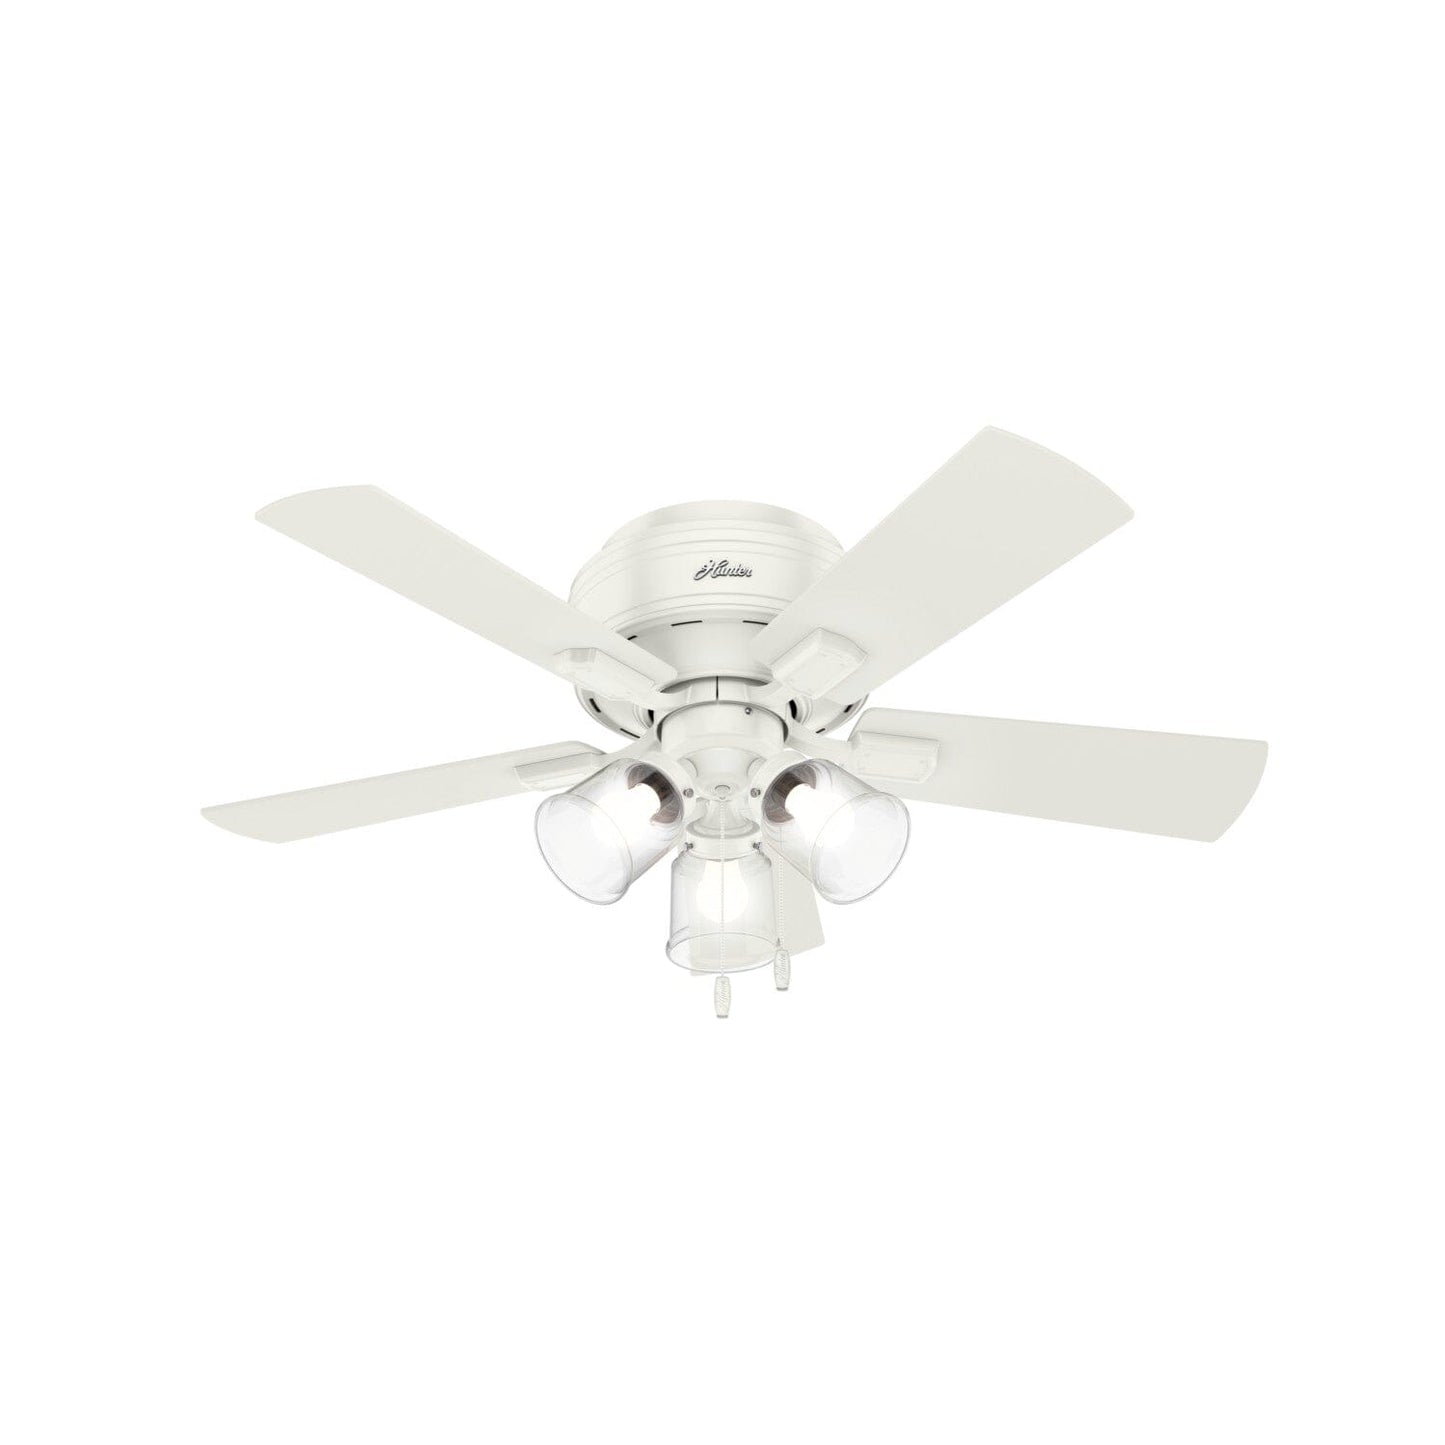 Crestfield Low Profile with 3 Lights 42 inch Ceiling Fans Hunter Fresh White - Fresh White 